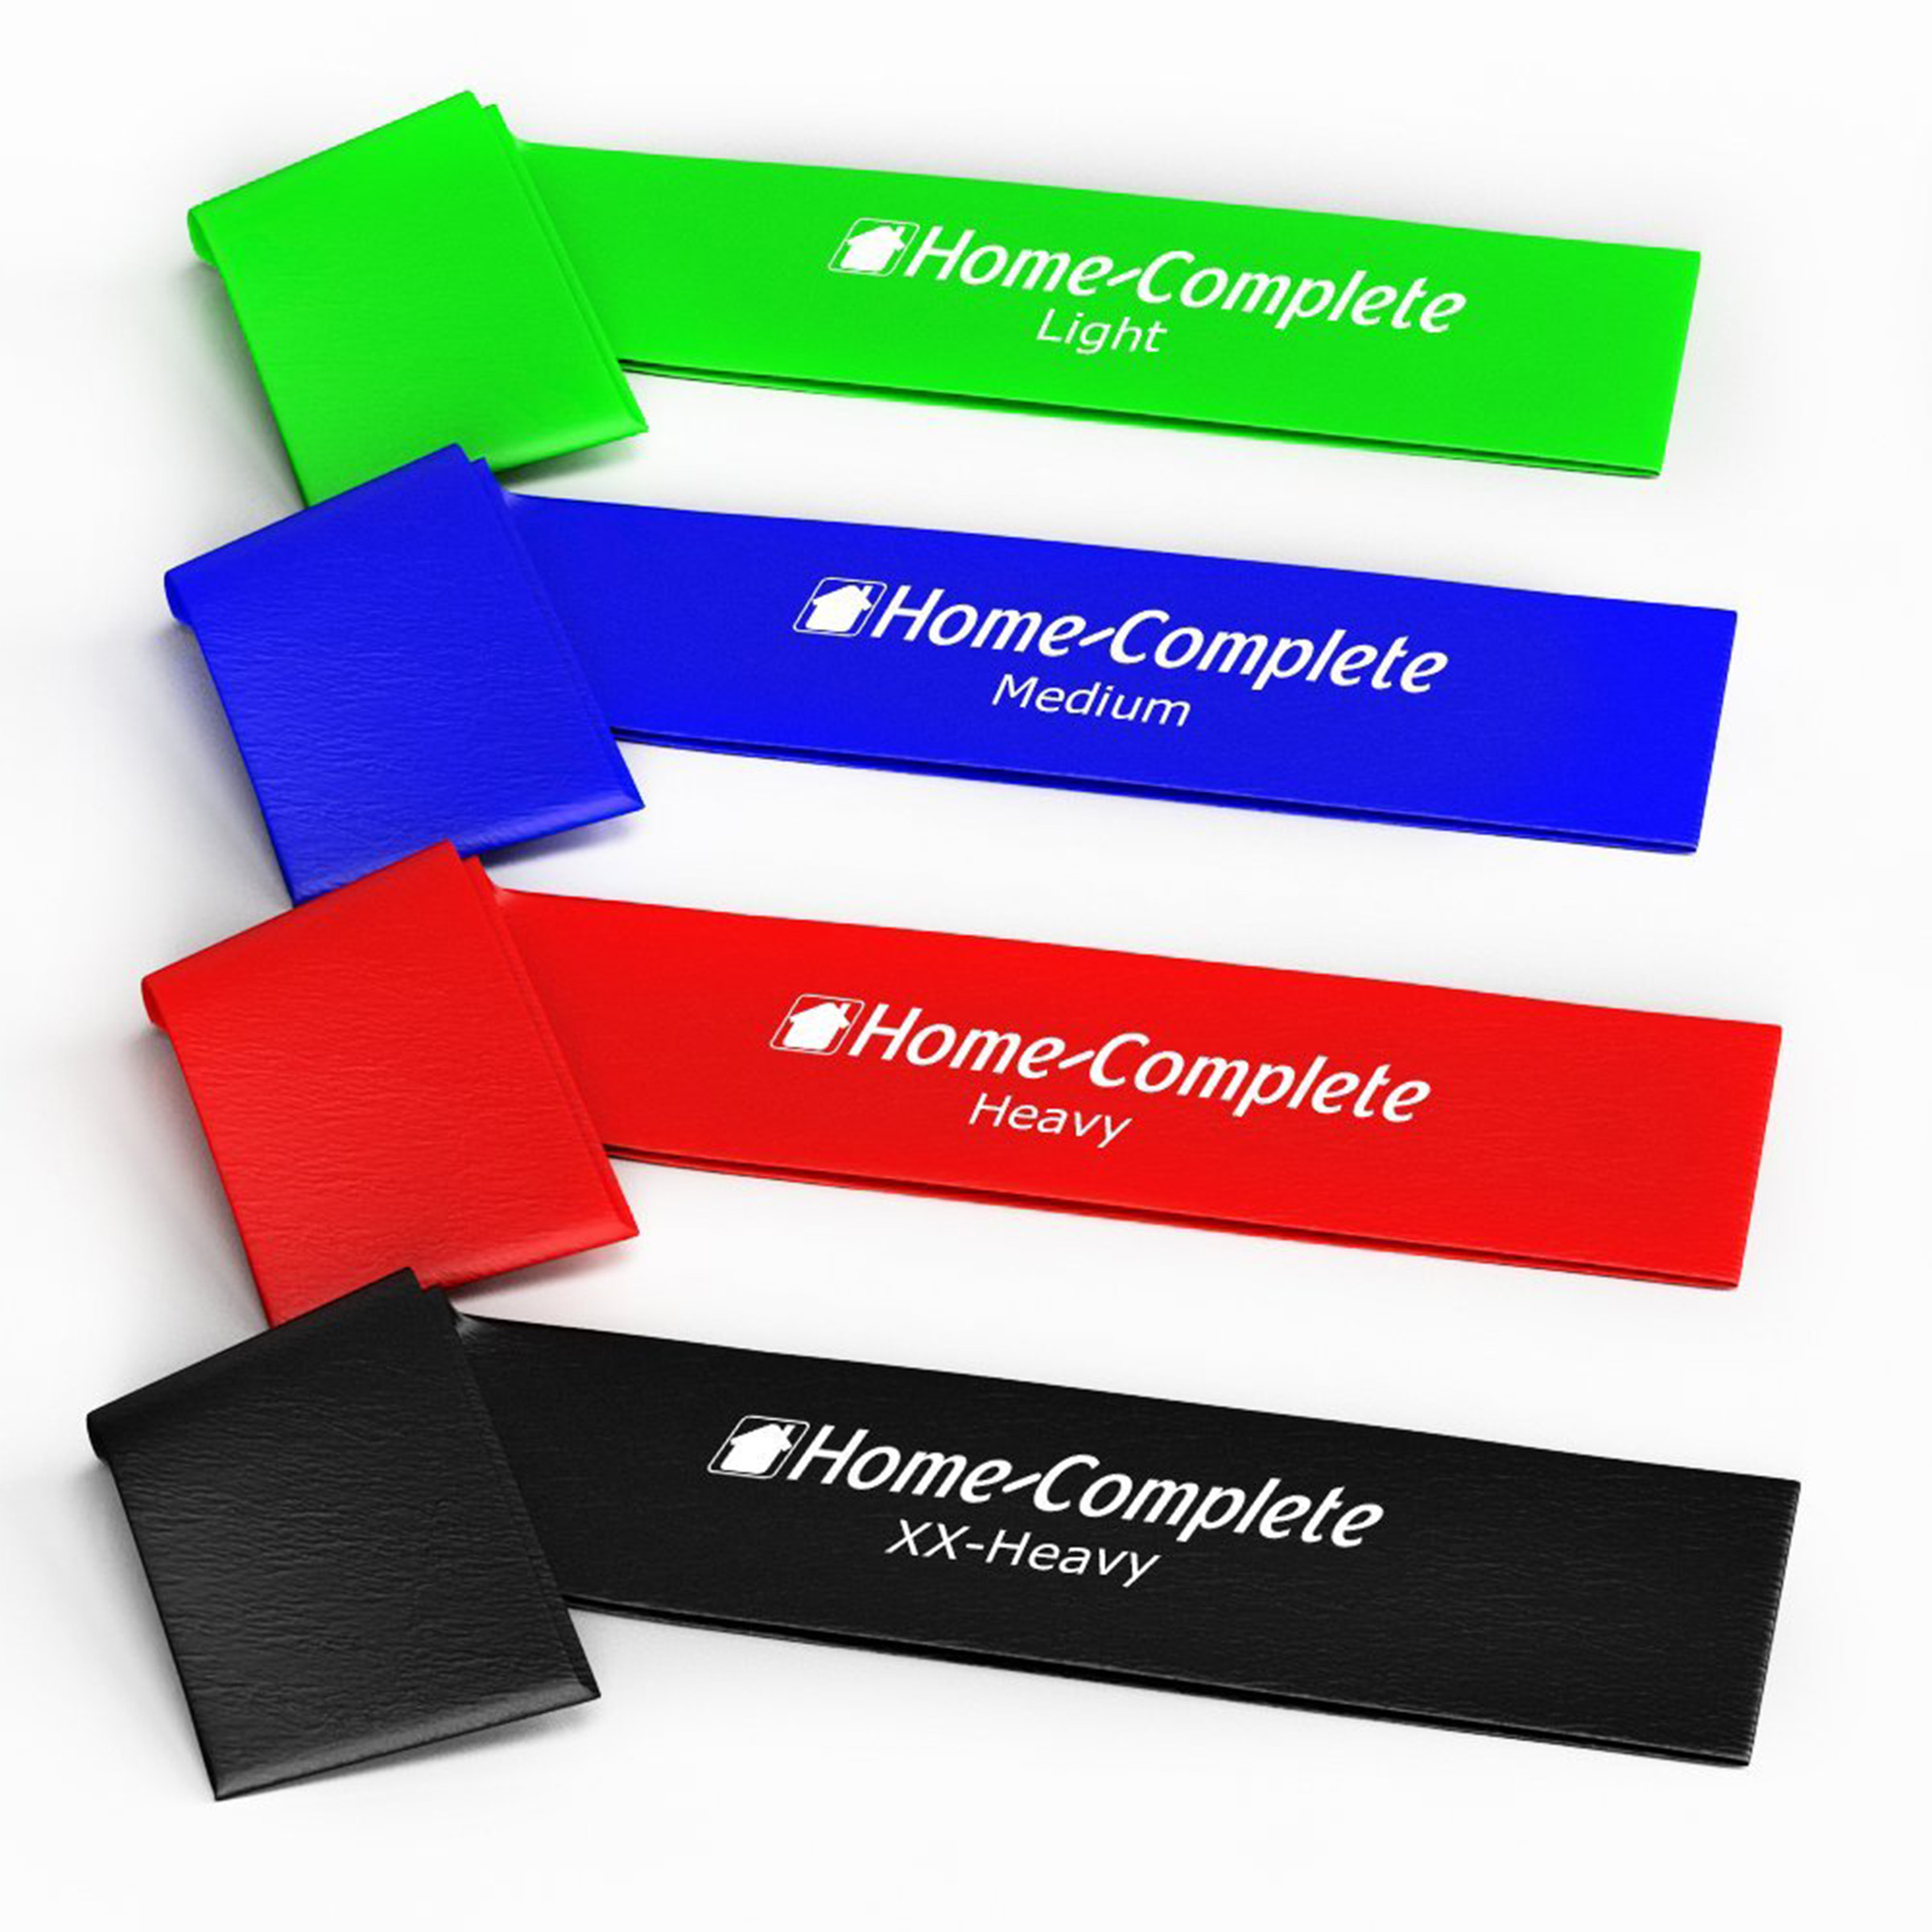 Home-Complete Resistance Bands Exercise Bands Loops- Set of 4 - image 1 of 6